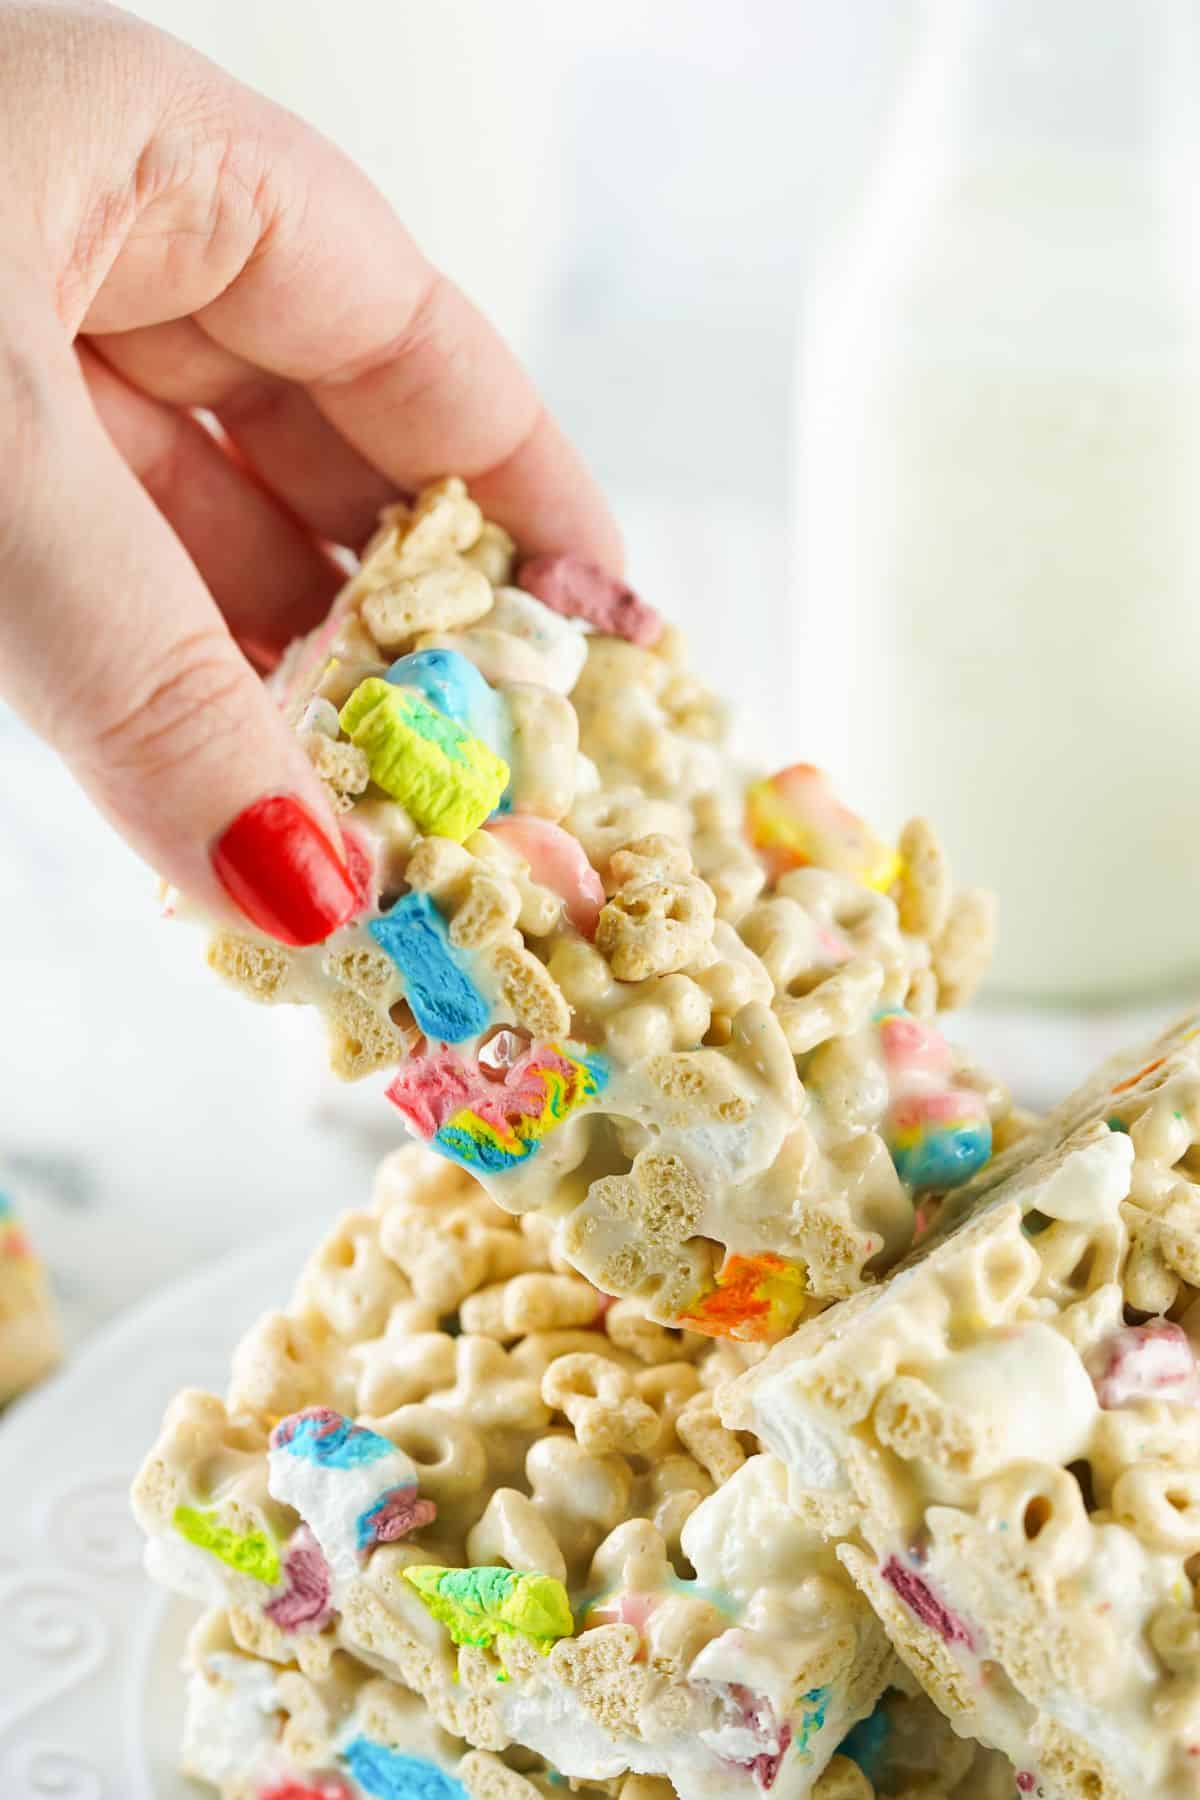 a woman's hand with red finger nails removing a lucky charms treat from a white plate